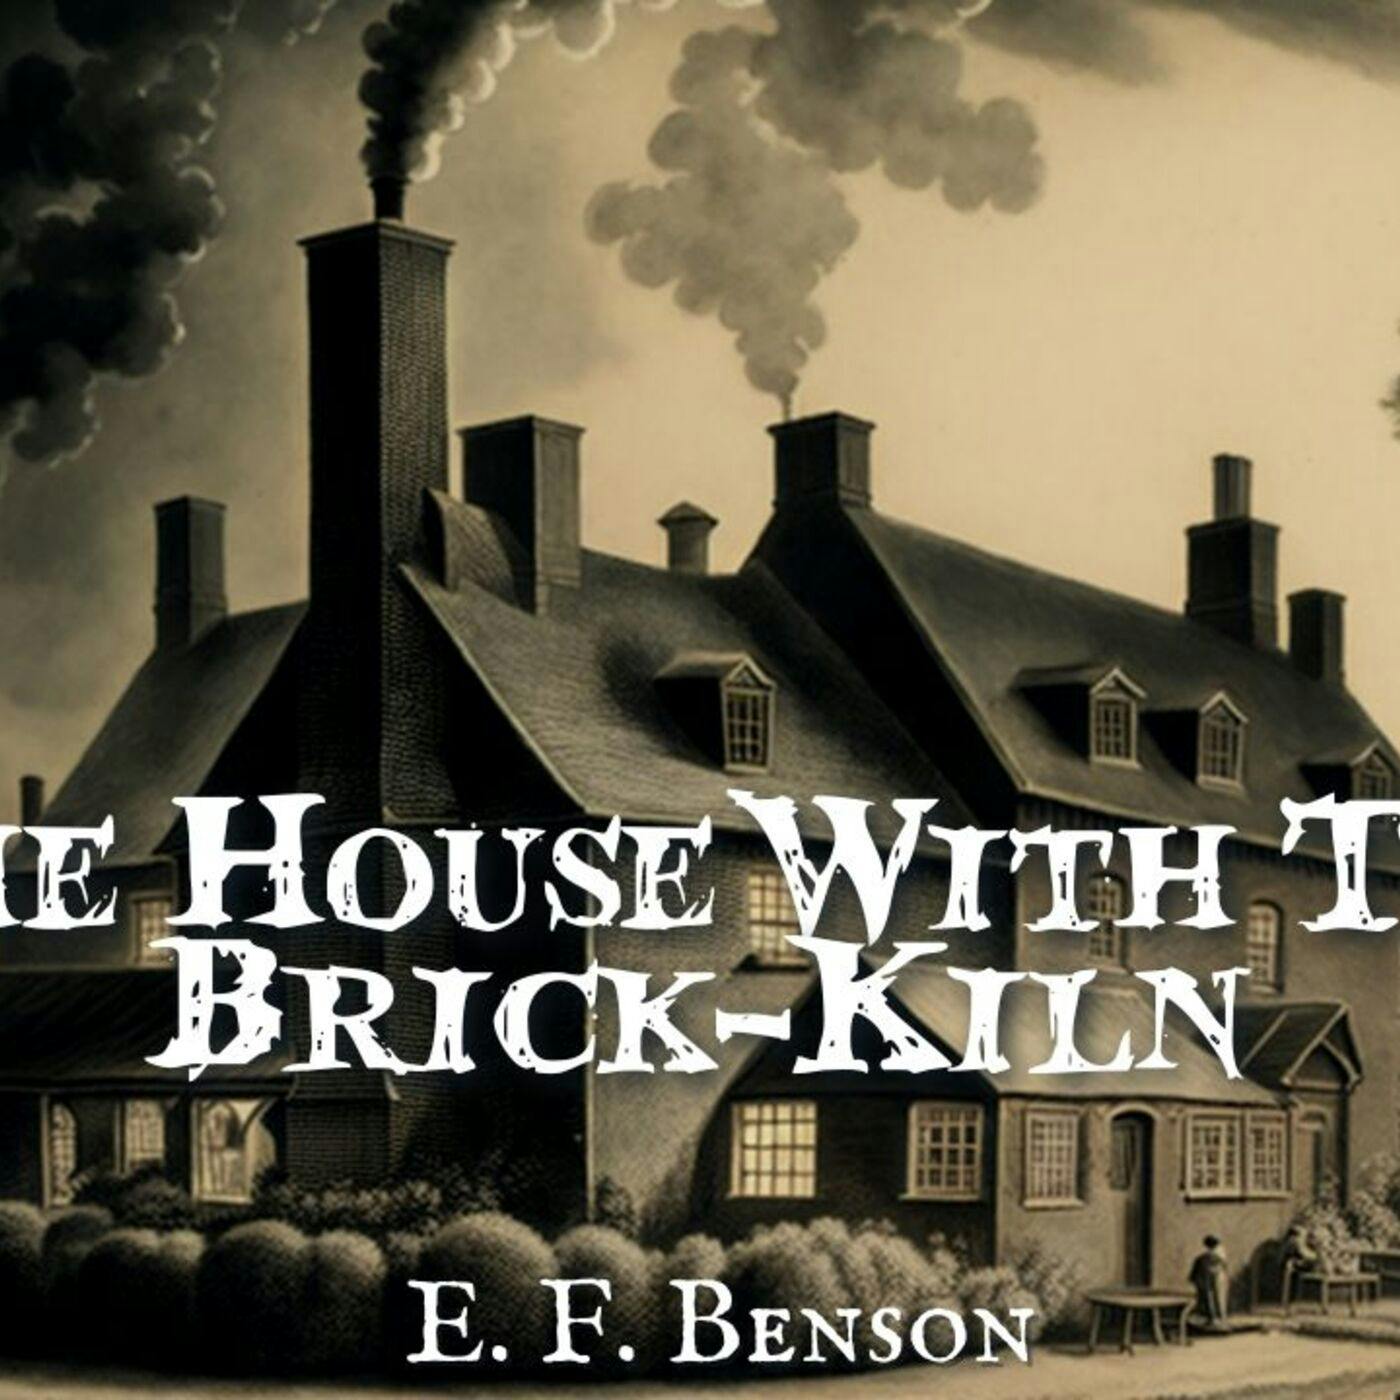 The House With The Brick-Kiln by E. F. Benson